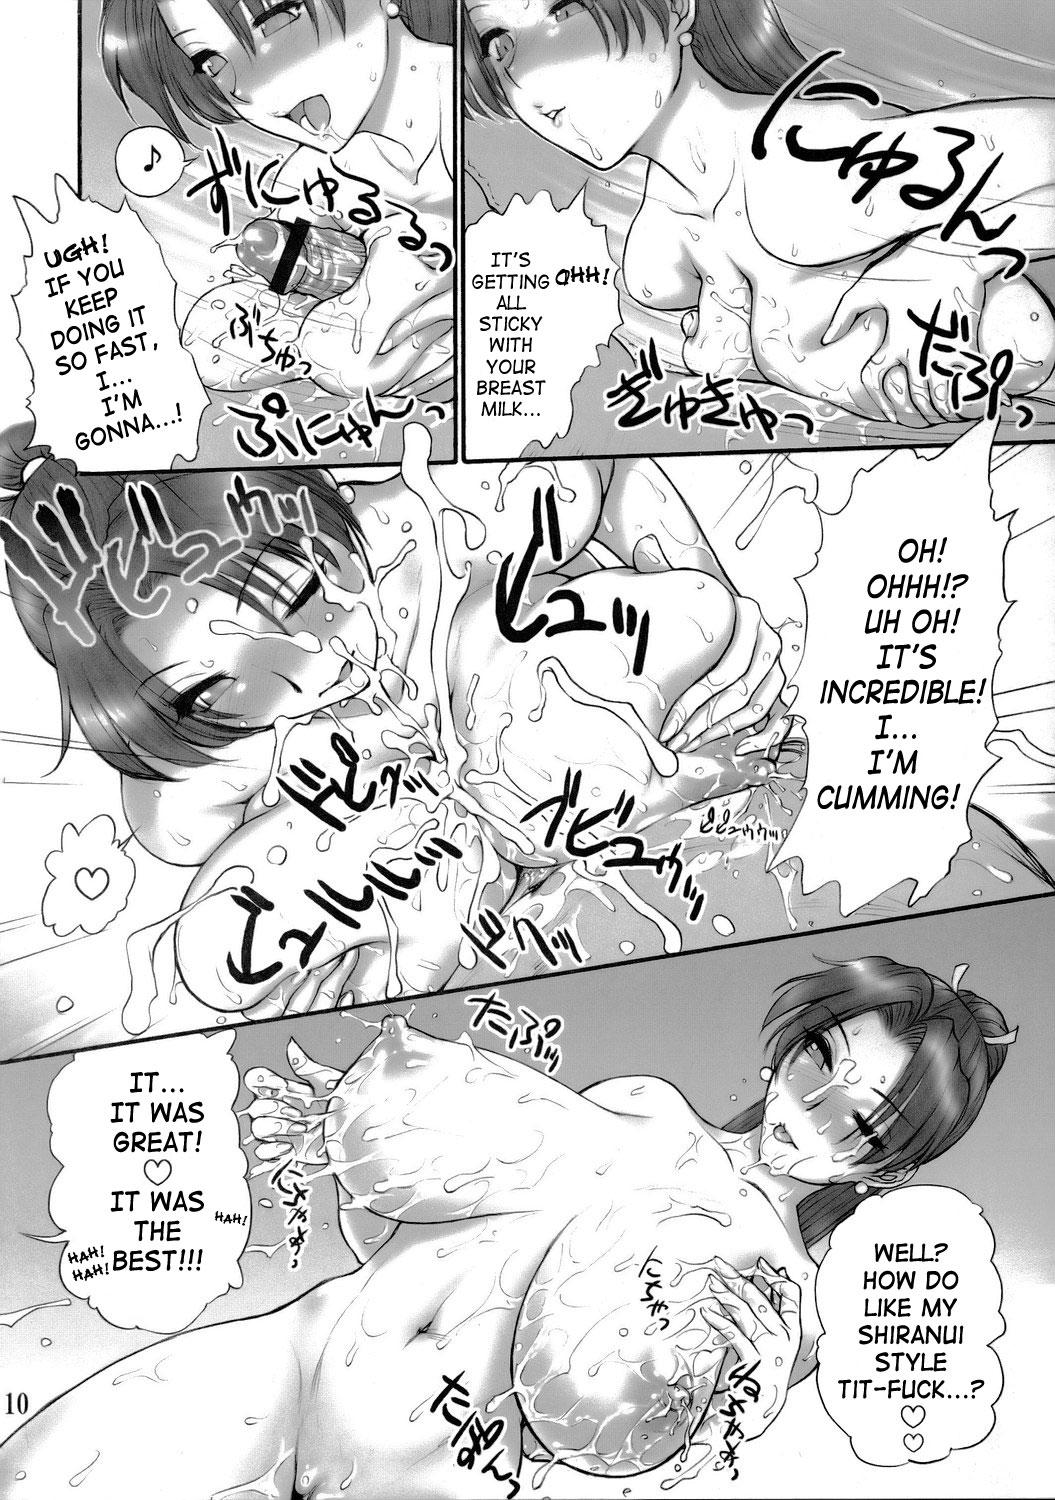 Holes (SC29) [Shinnihon Pepsitou (St. Germain-sal)] Report Concerning Kyoku-gen-ryuu (The King of Fighters) [English] [SaHa] - King of fighters Missionary Porn - Page 11